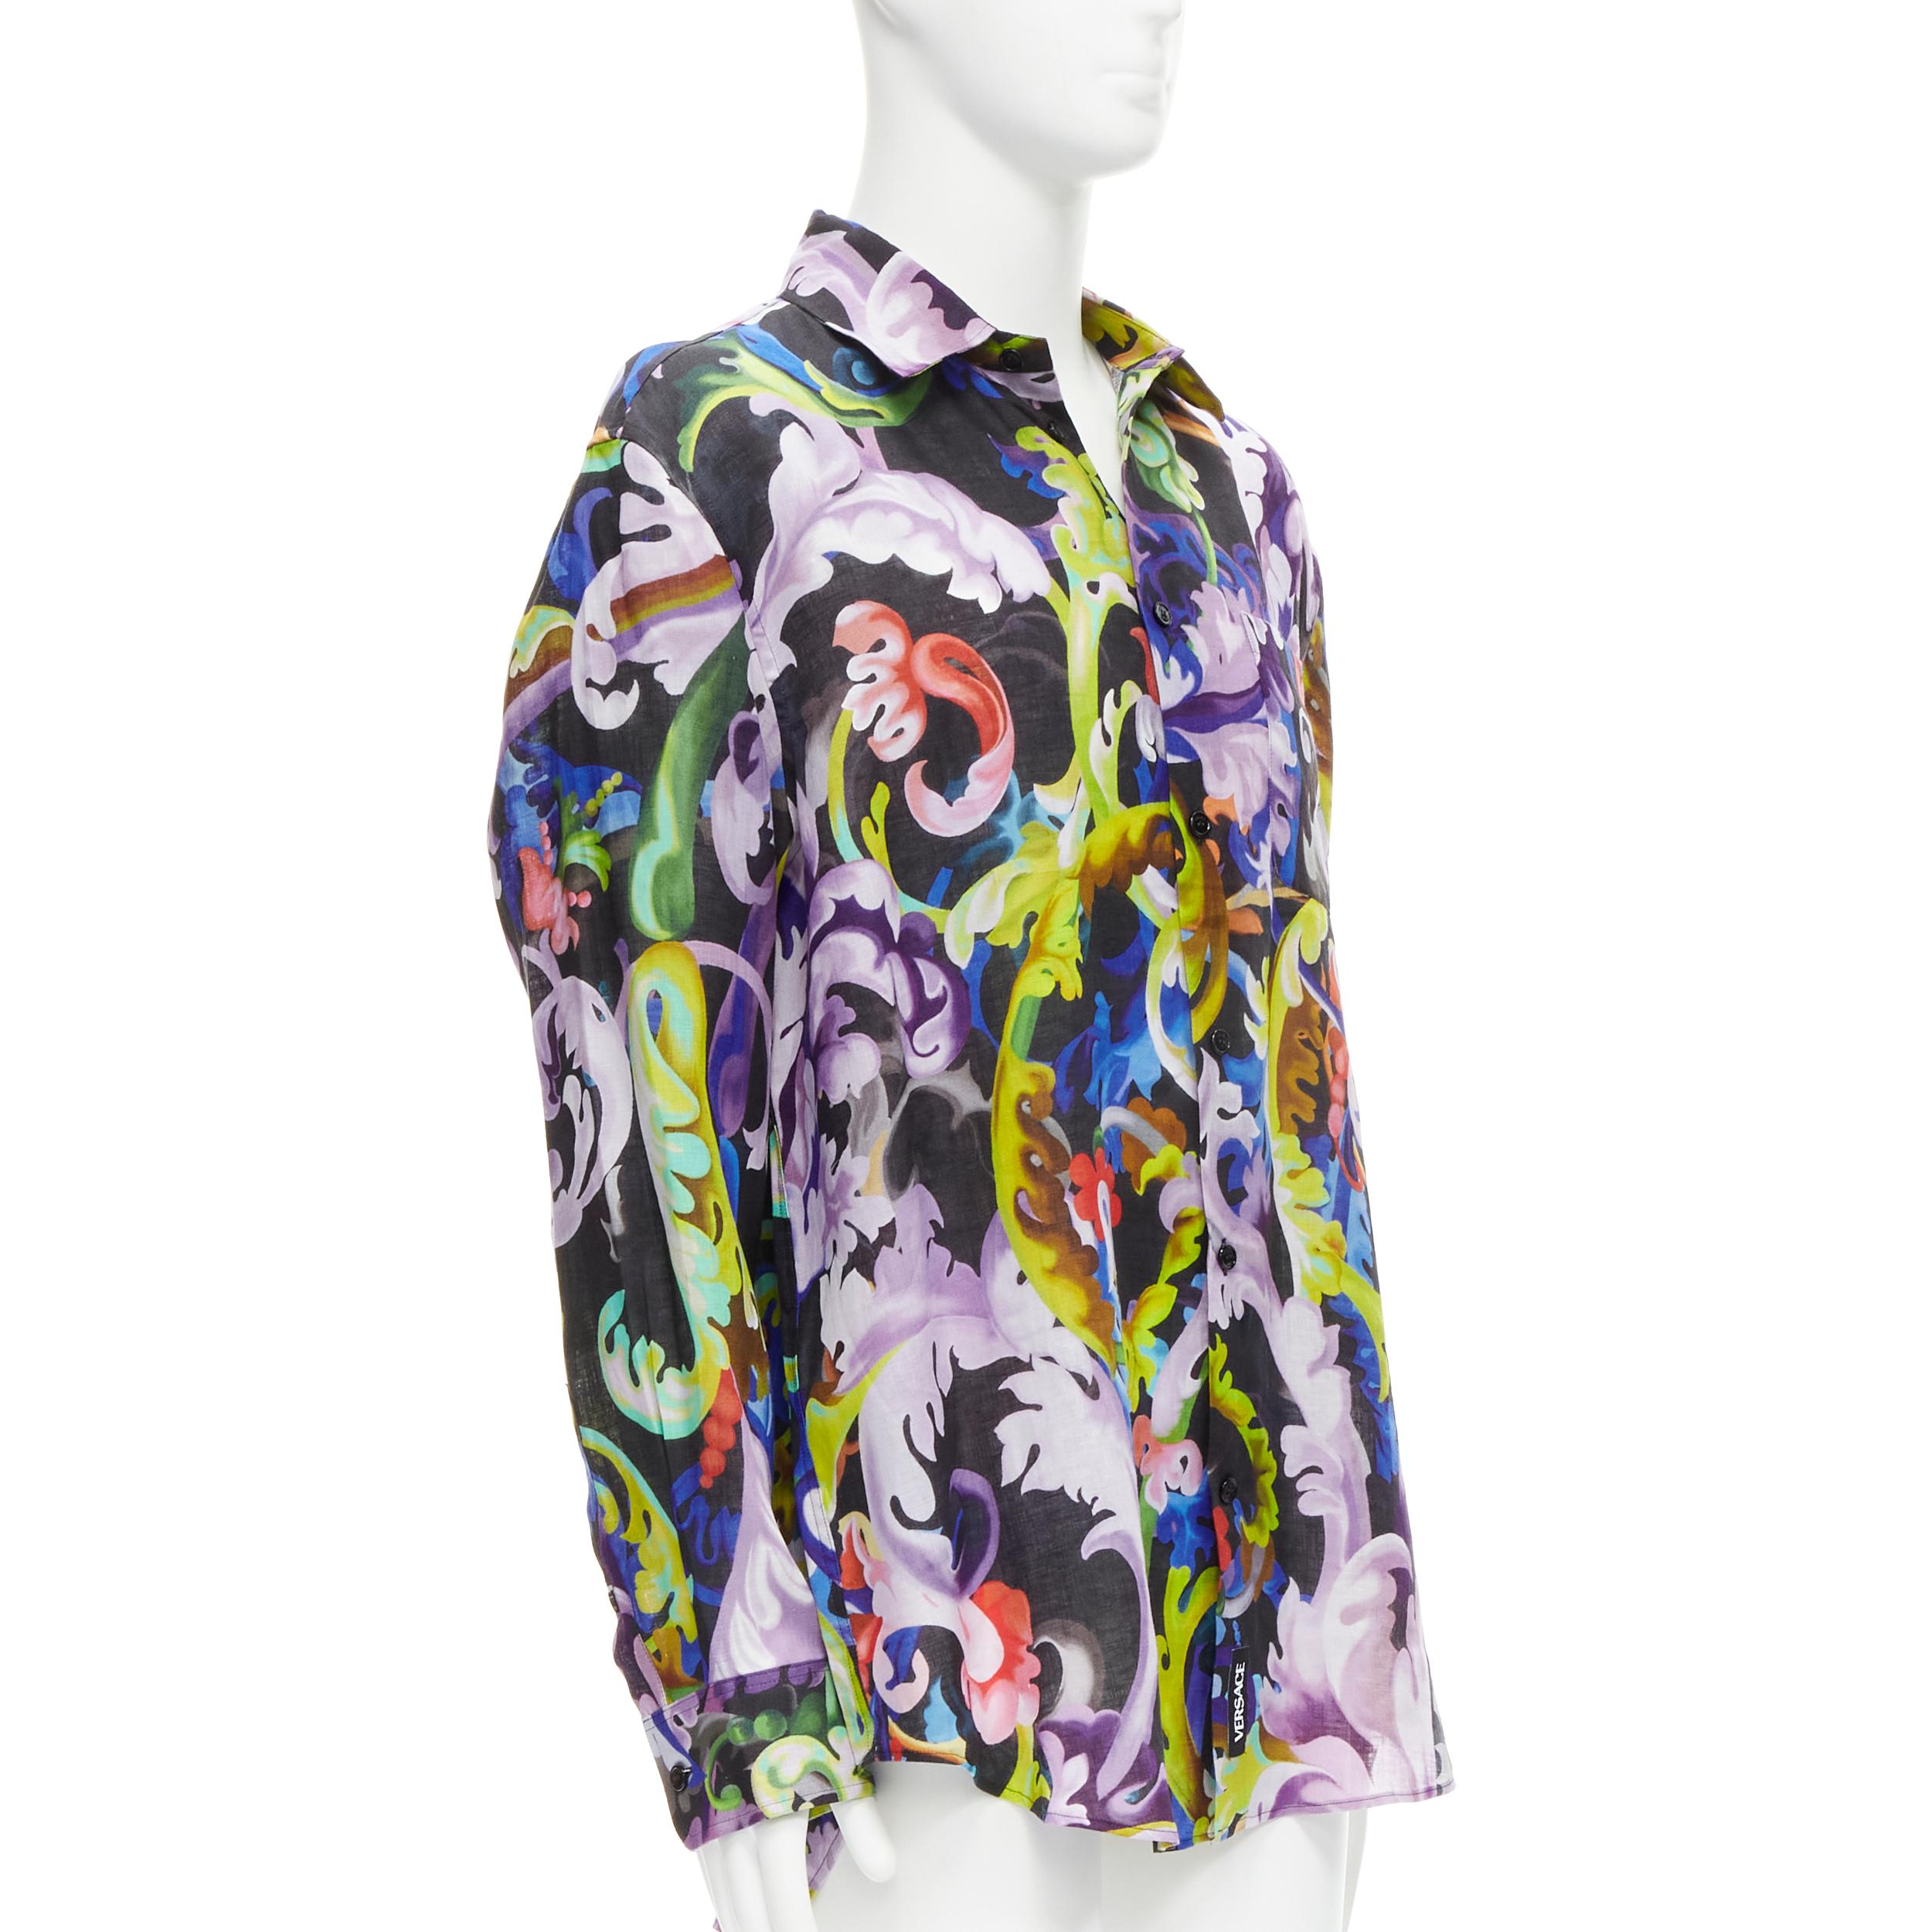 new VERSACE 2021 Runway Baroccoflage colorful baroque floral linen shirt EU40 L
Reference: TGAS/C01834
Brand: Versace
Model: 1000920 1A00628 5B020
Collection: 2021
Material: Linen
Color: Multicolour
Pattern: Floral
Closure: Button
Extra Details: